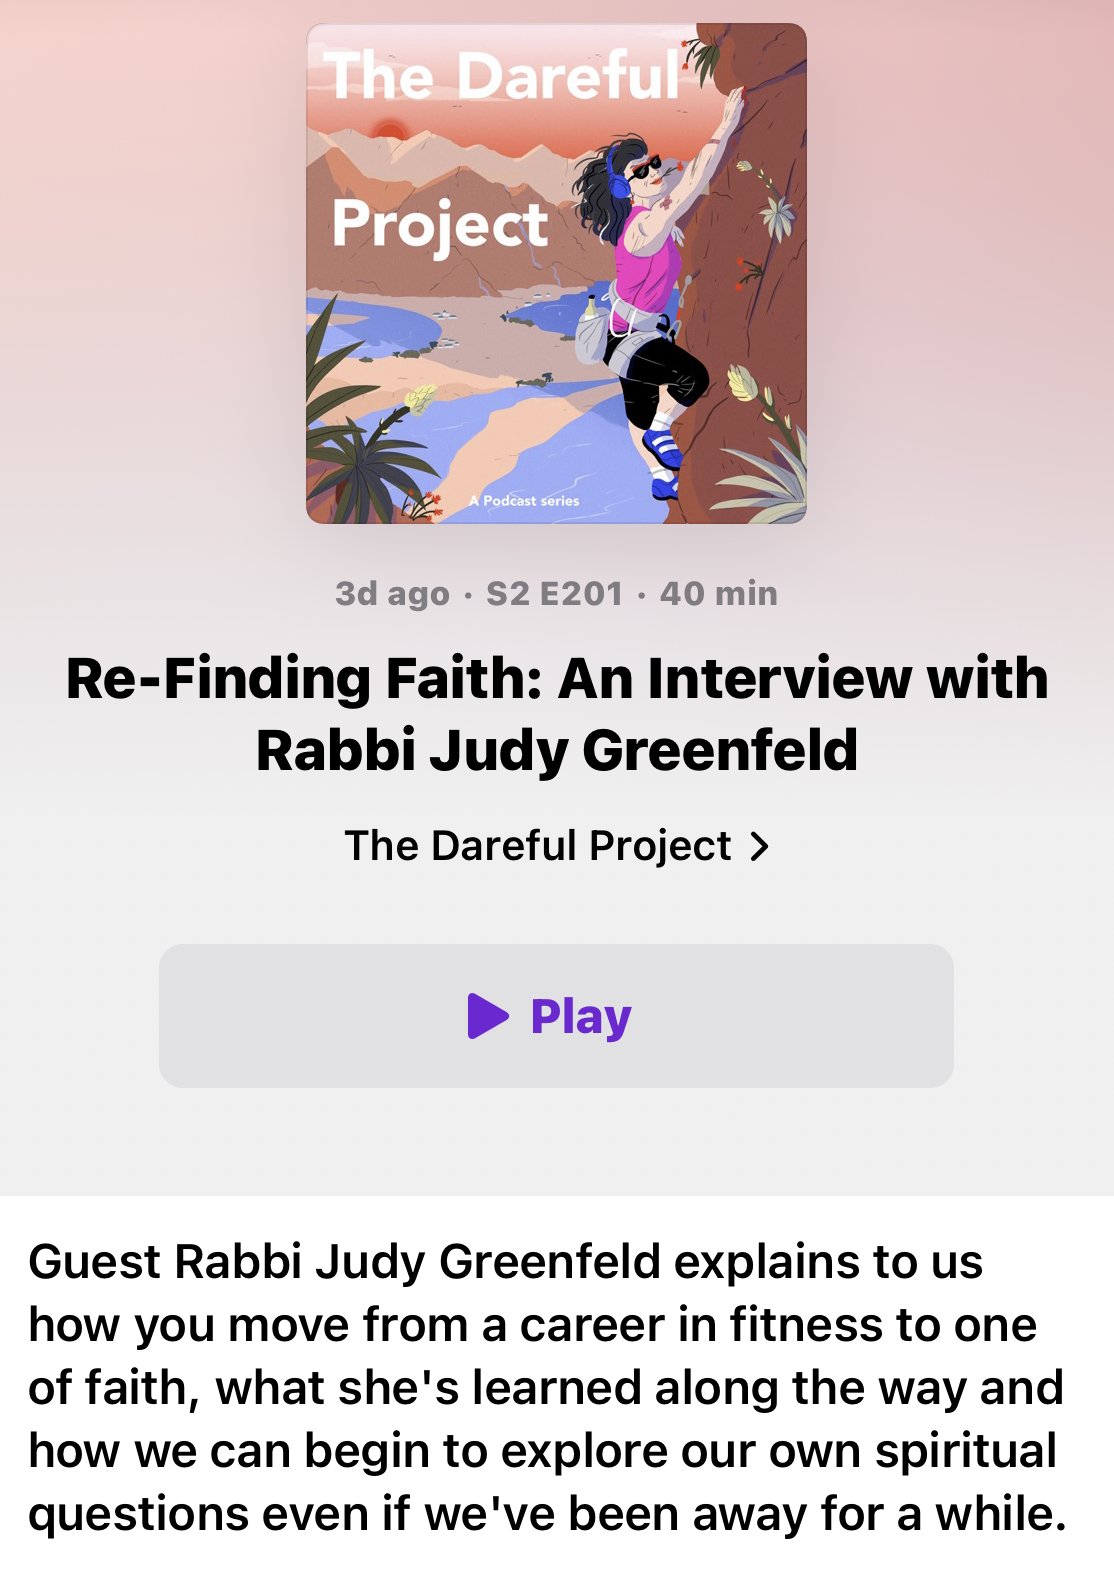 Re-Finding Faith: An Interview with Rabbi Judy Greenfeld